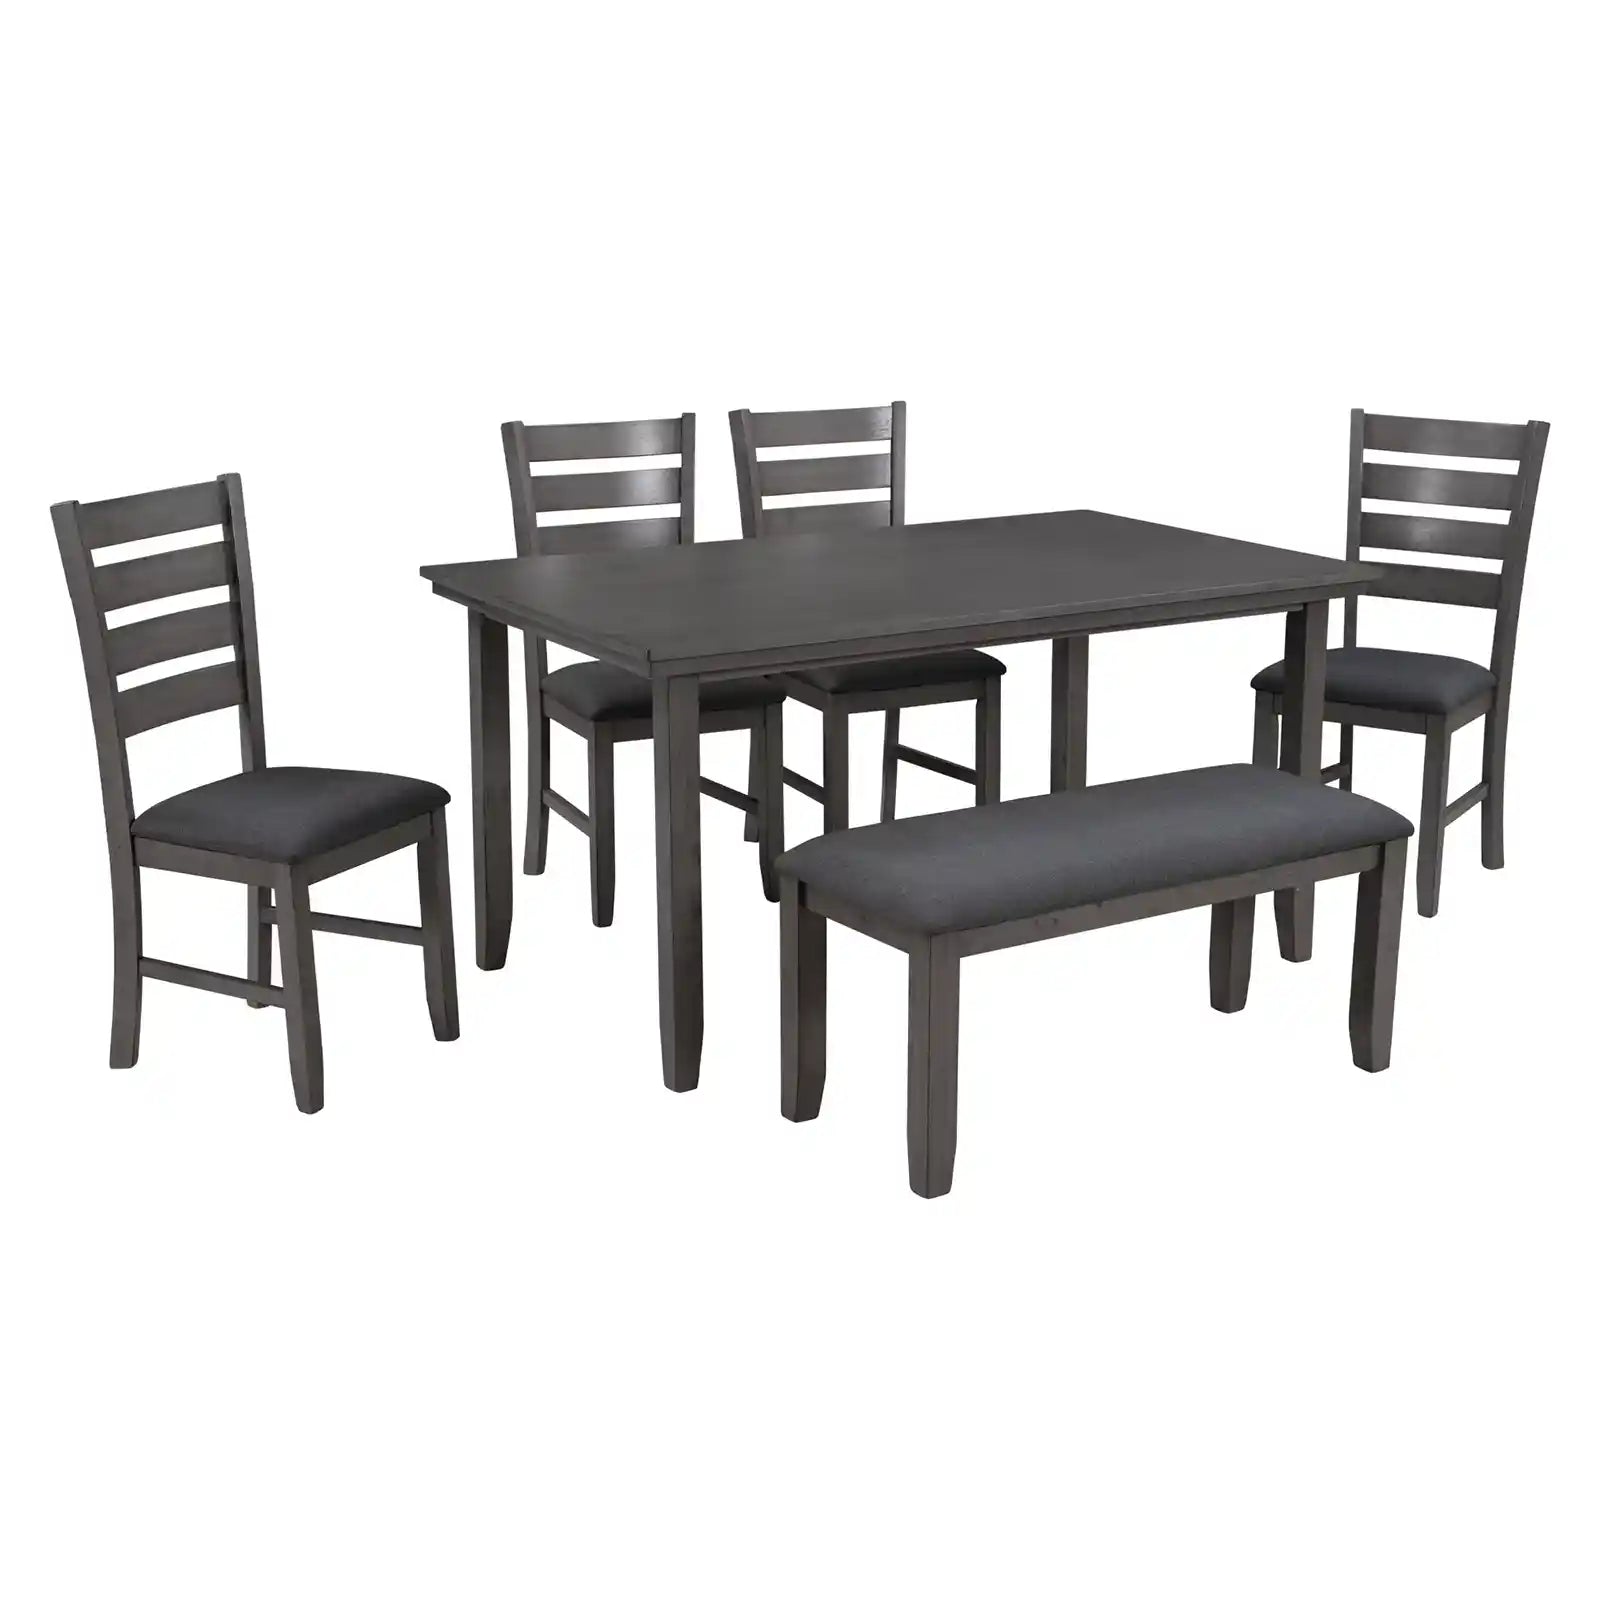 Dining Table Set for 6, Rustic Country Acacia Table Set with 4 Chairs and Bench